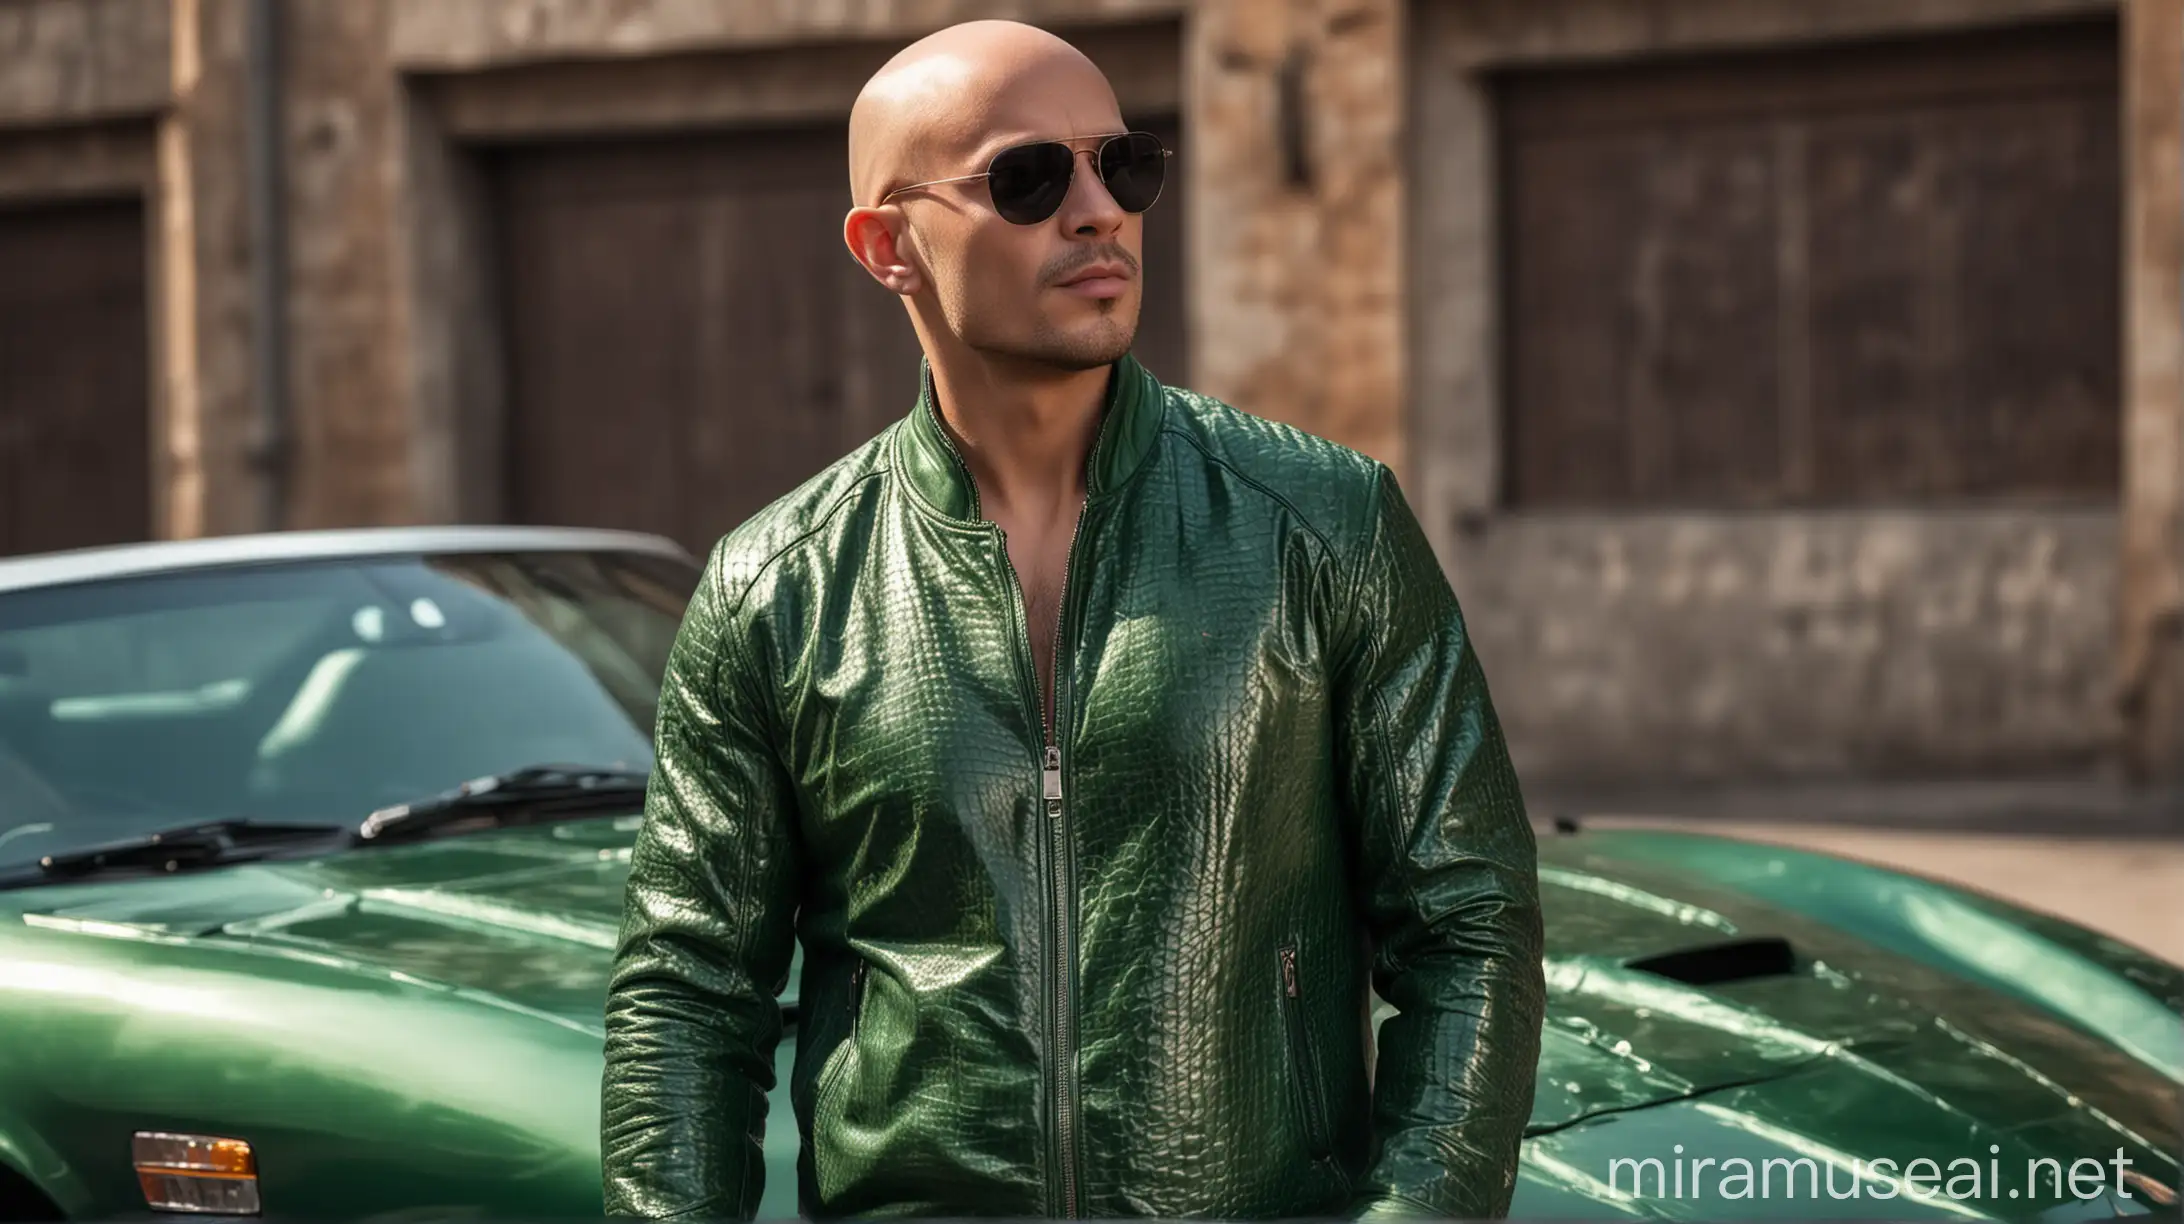 Confident Bald Man with Cigar Beside Cobra Skin Leather Jacket and Supercar